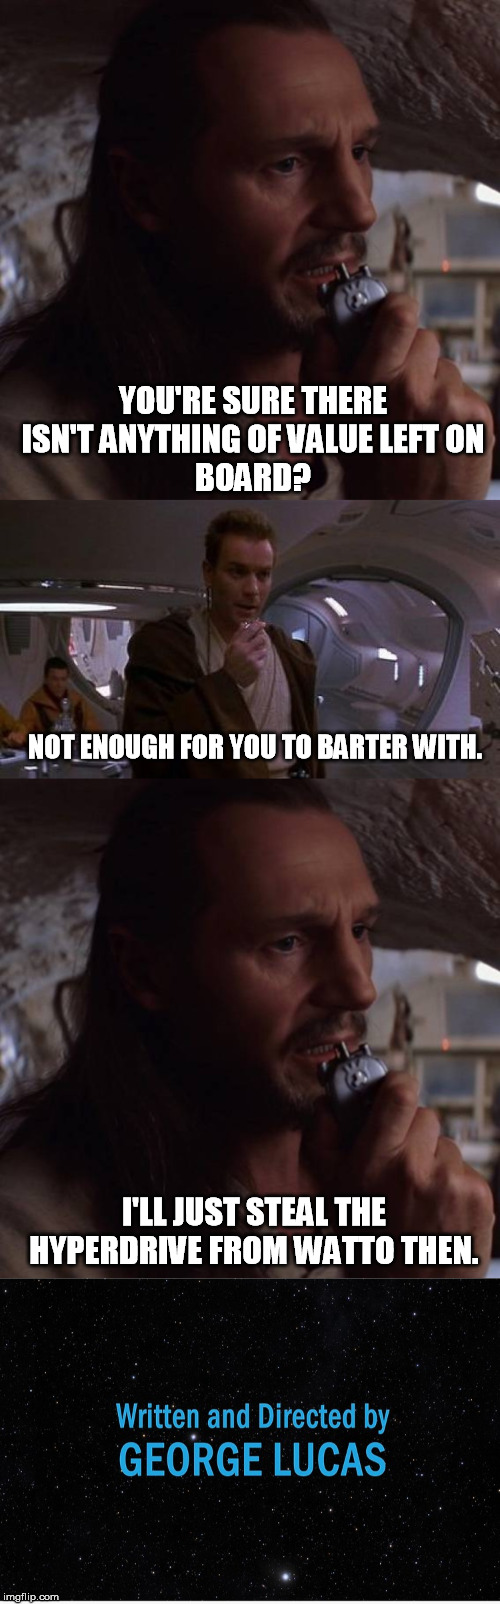 How it should have ended | YOU'RE SURE THERE ISN'T ANYTHING OF VALUE LEFT ON
BOARD? NOT ENOUGH FOR YOU TO BARTER WITH. I'LL JUST STEAL THE HYPERDRIVE FROM WATTO THEN. | image tagged in star wars,the end | made w/ Imgflip meme maker